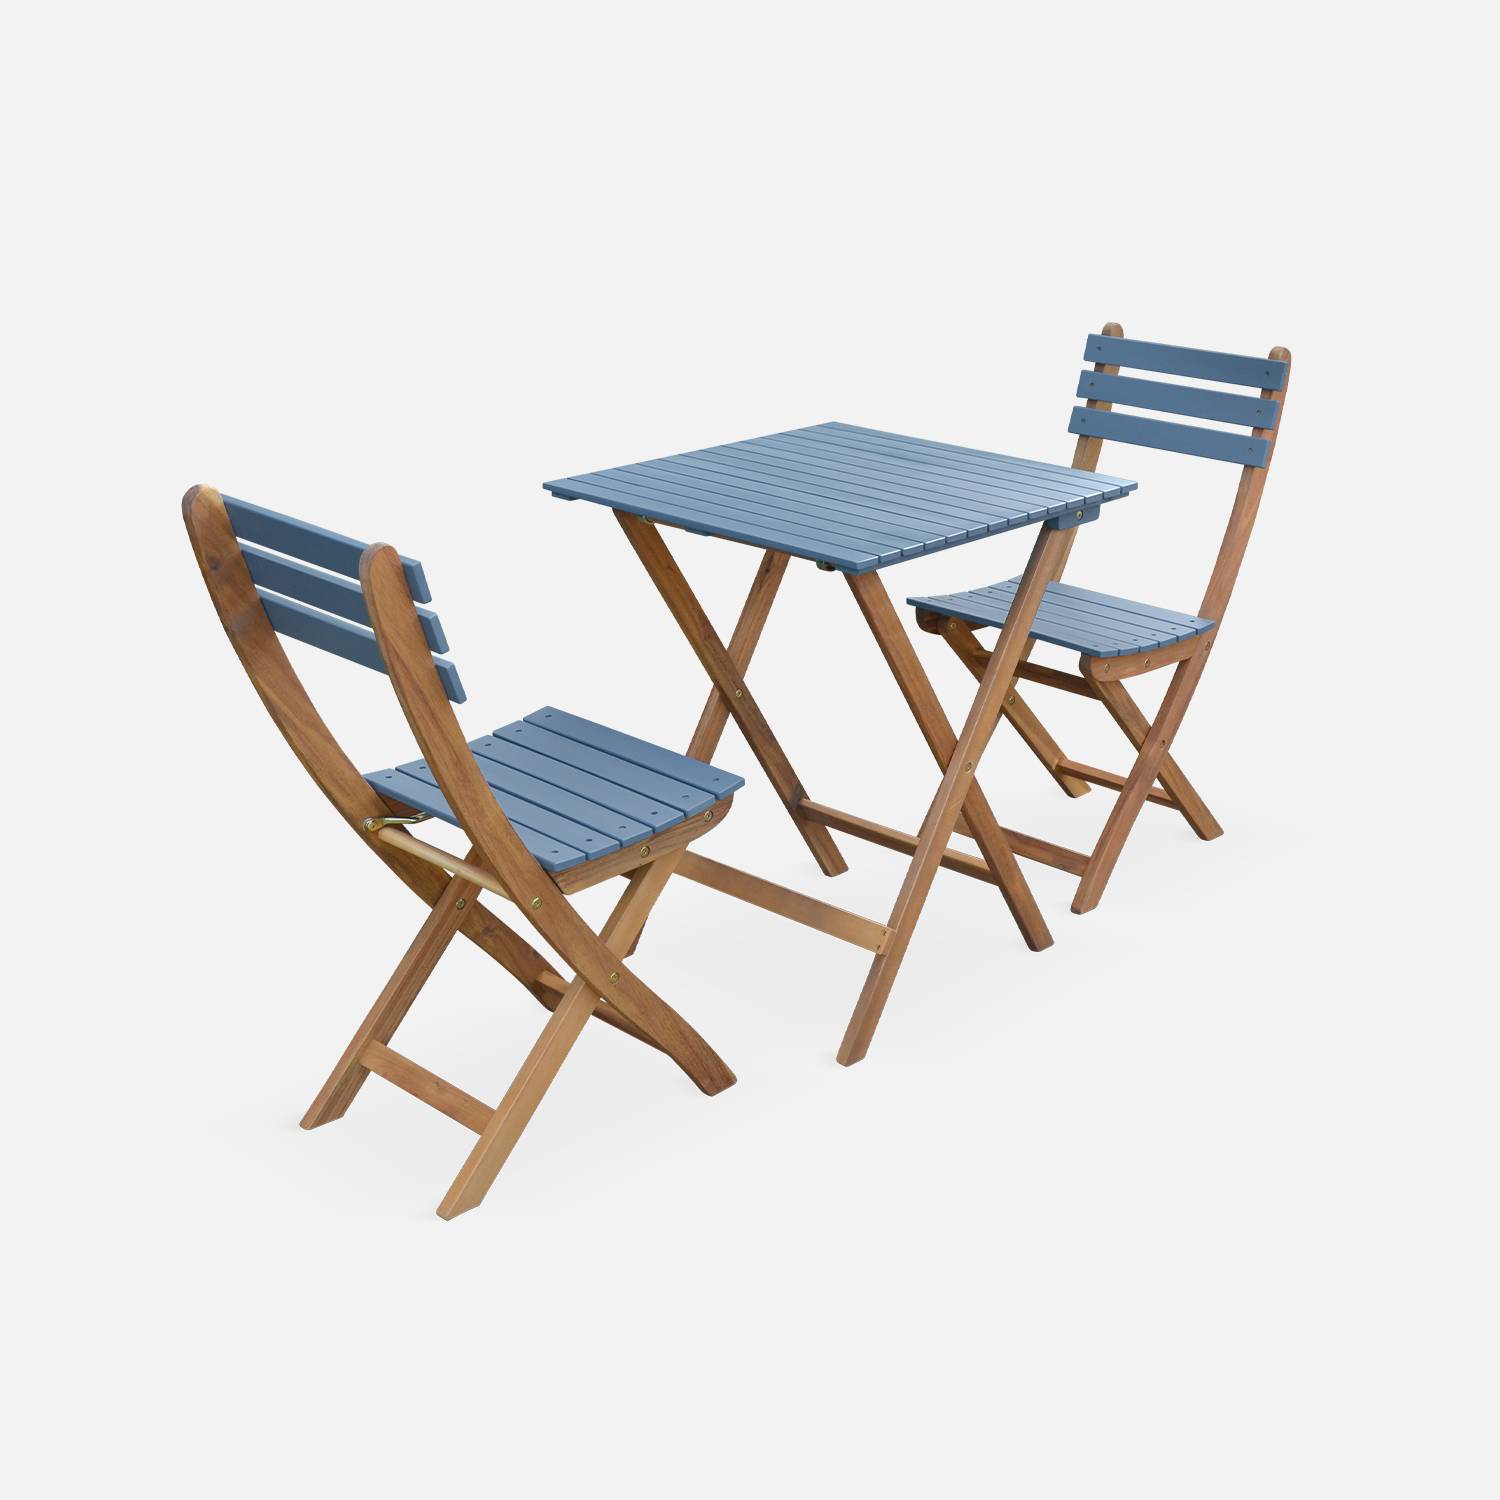 2-seater foldable wooden bistro garden table with chairs, 60x60cm, Grey Blue | sweeek